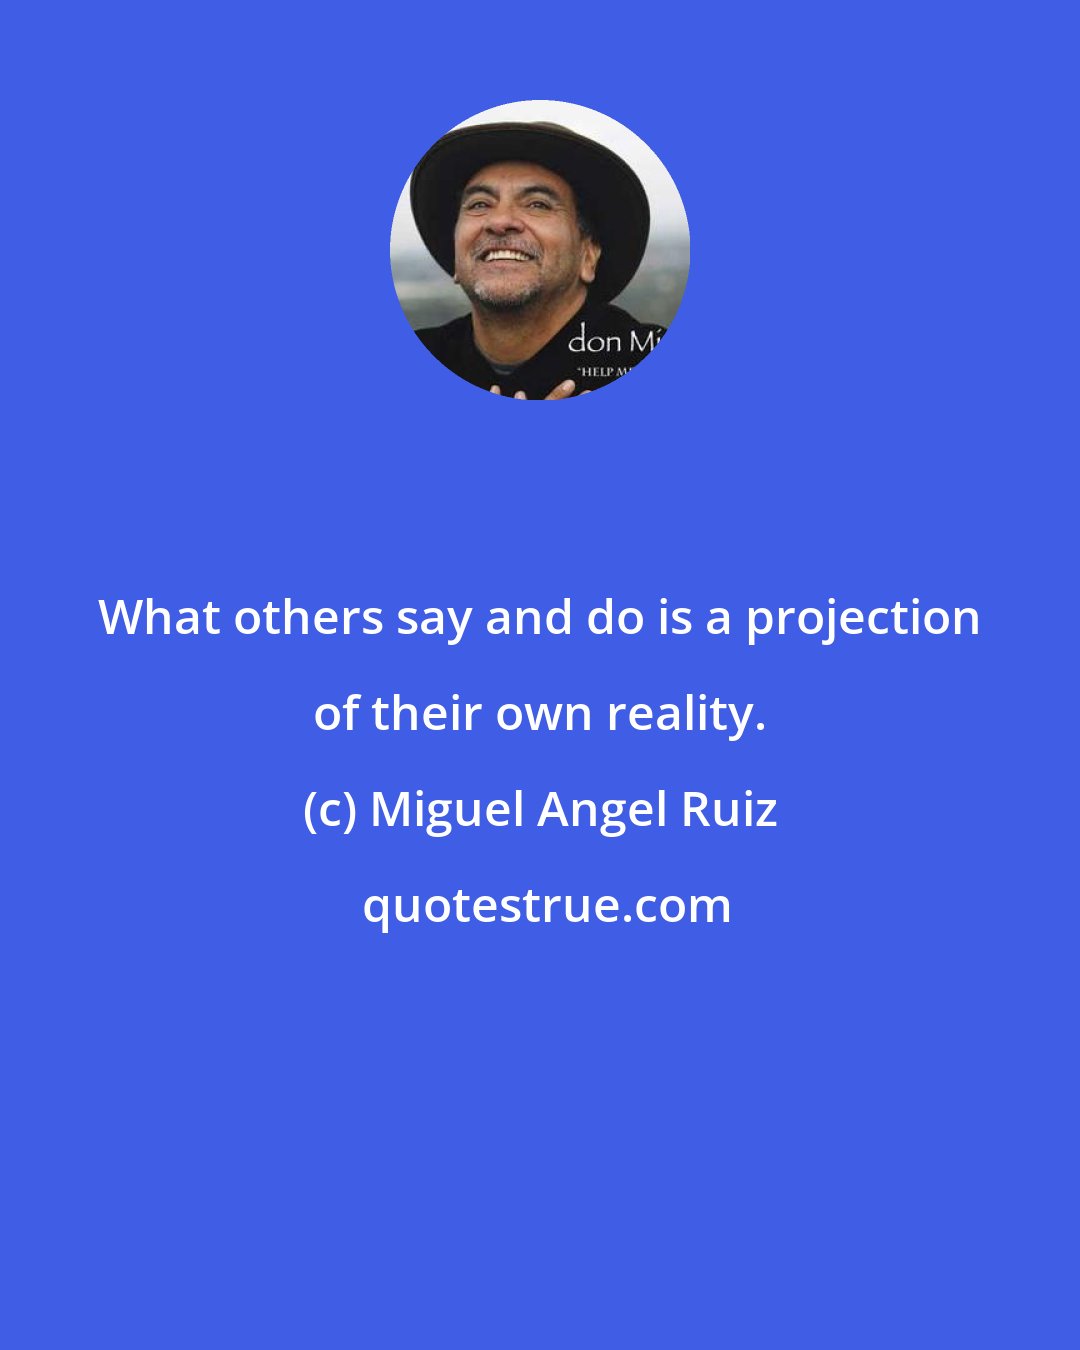 Miguel Angel Ruiz: What others say and do is a projection of their own reality.